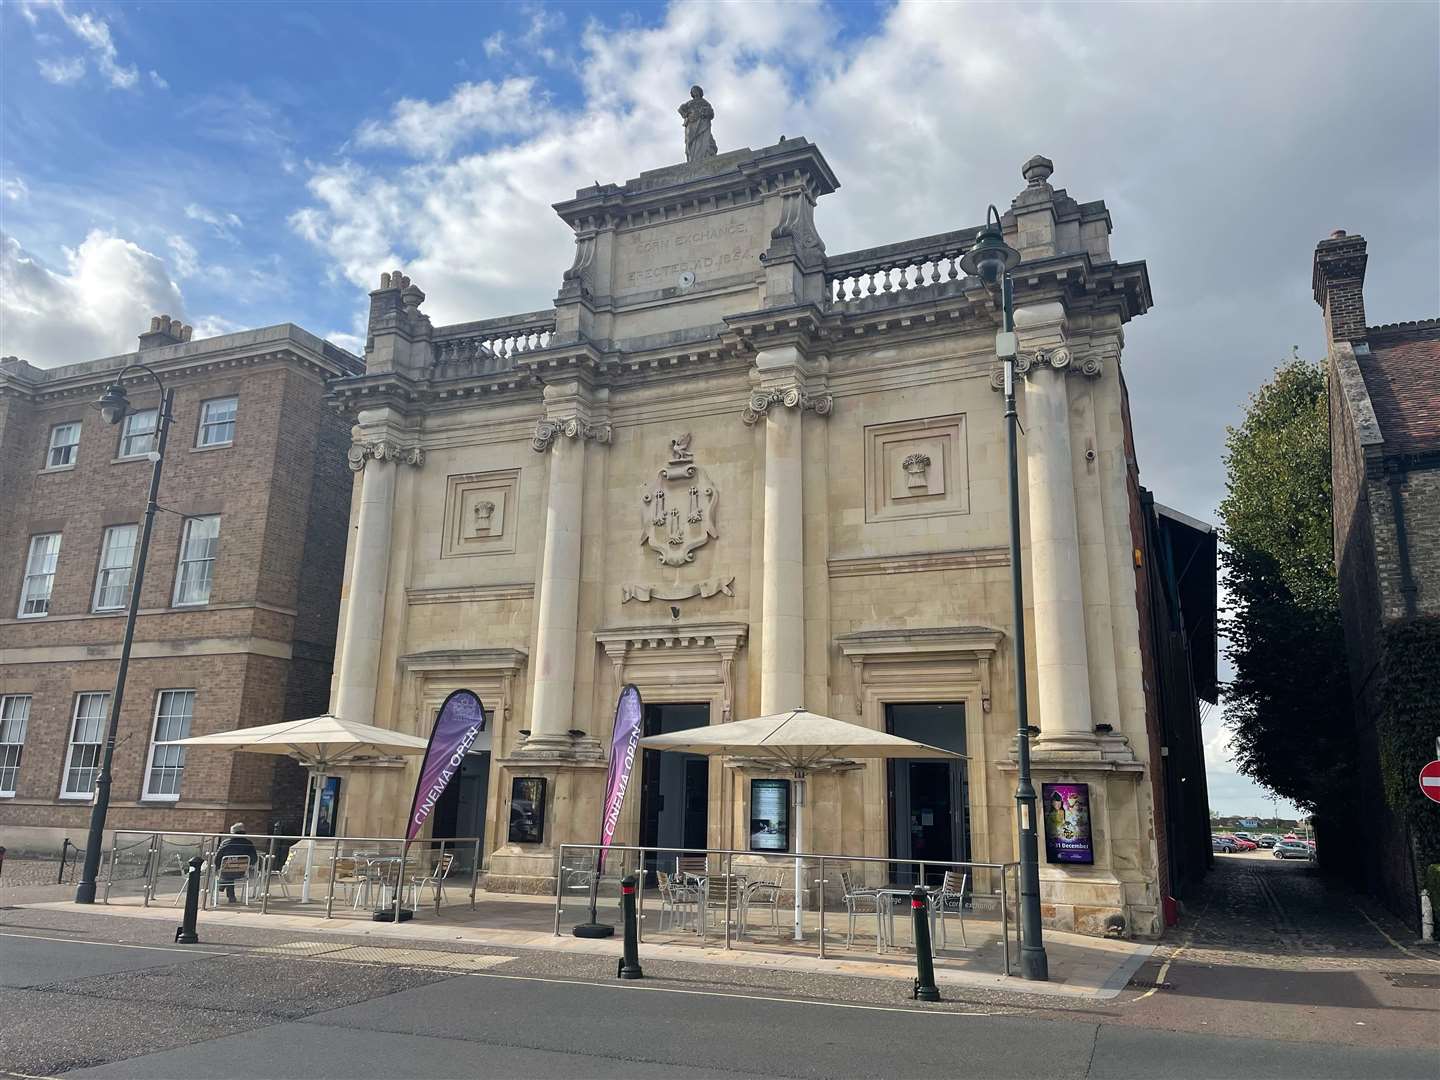 The Corn Exchange on Tuesday Market Place, Lynn will host BBC One's Question Time this June